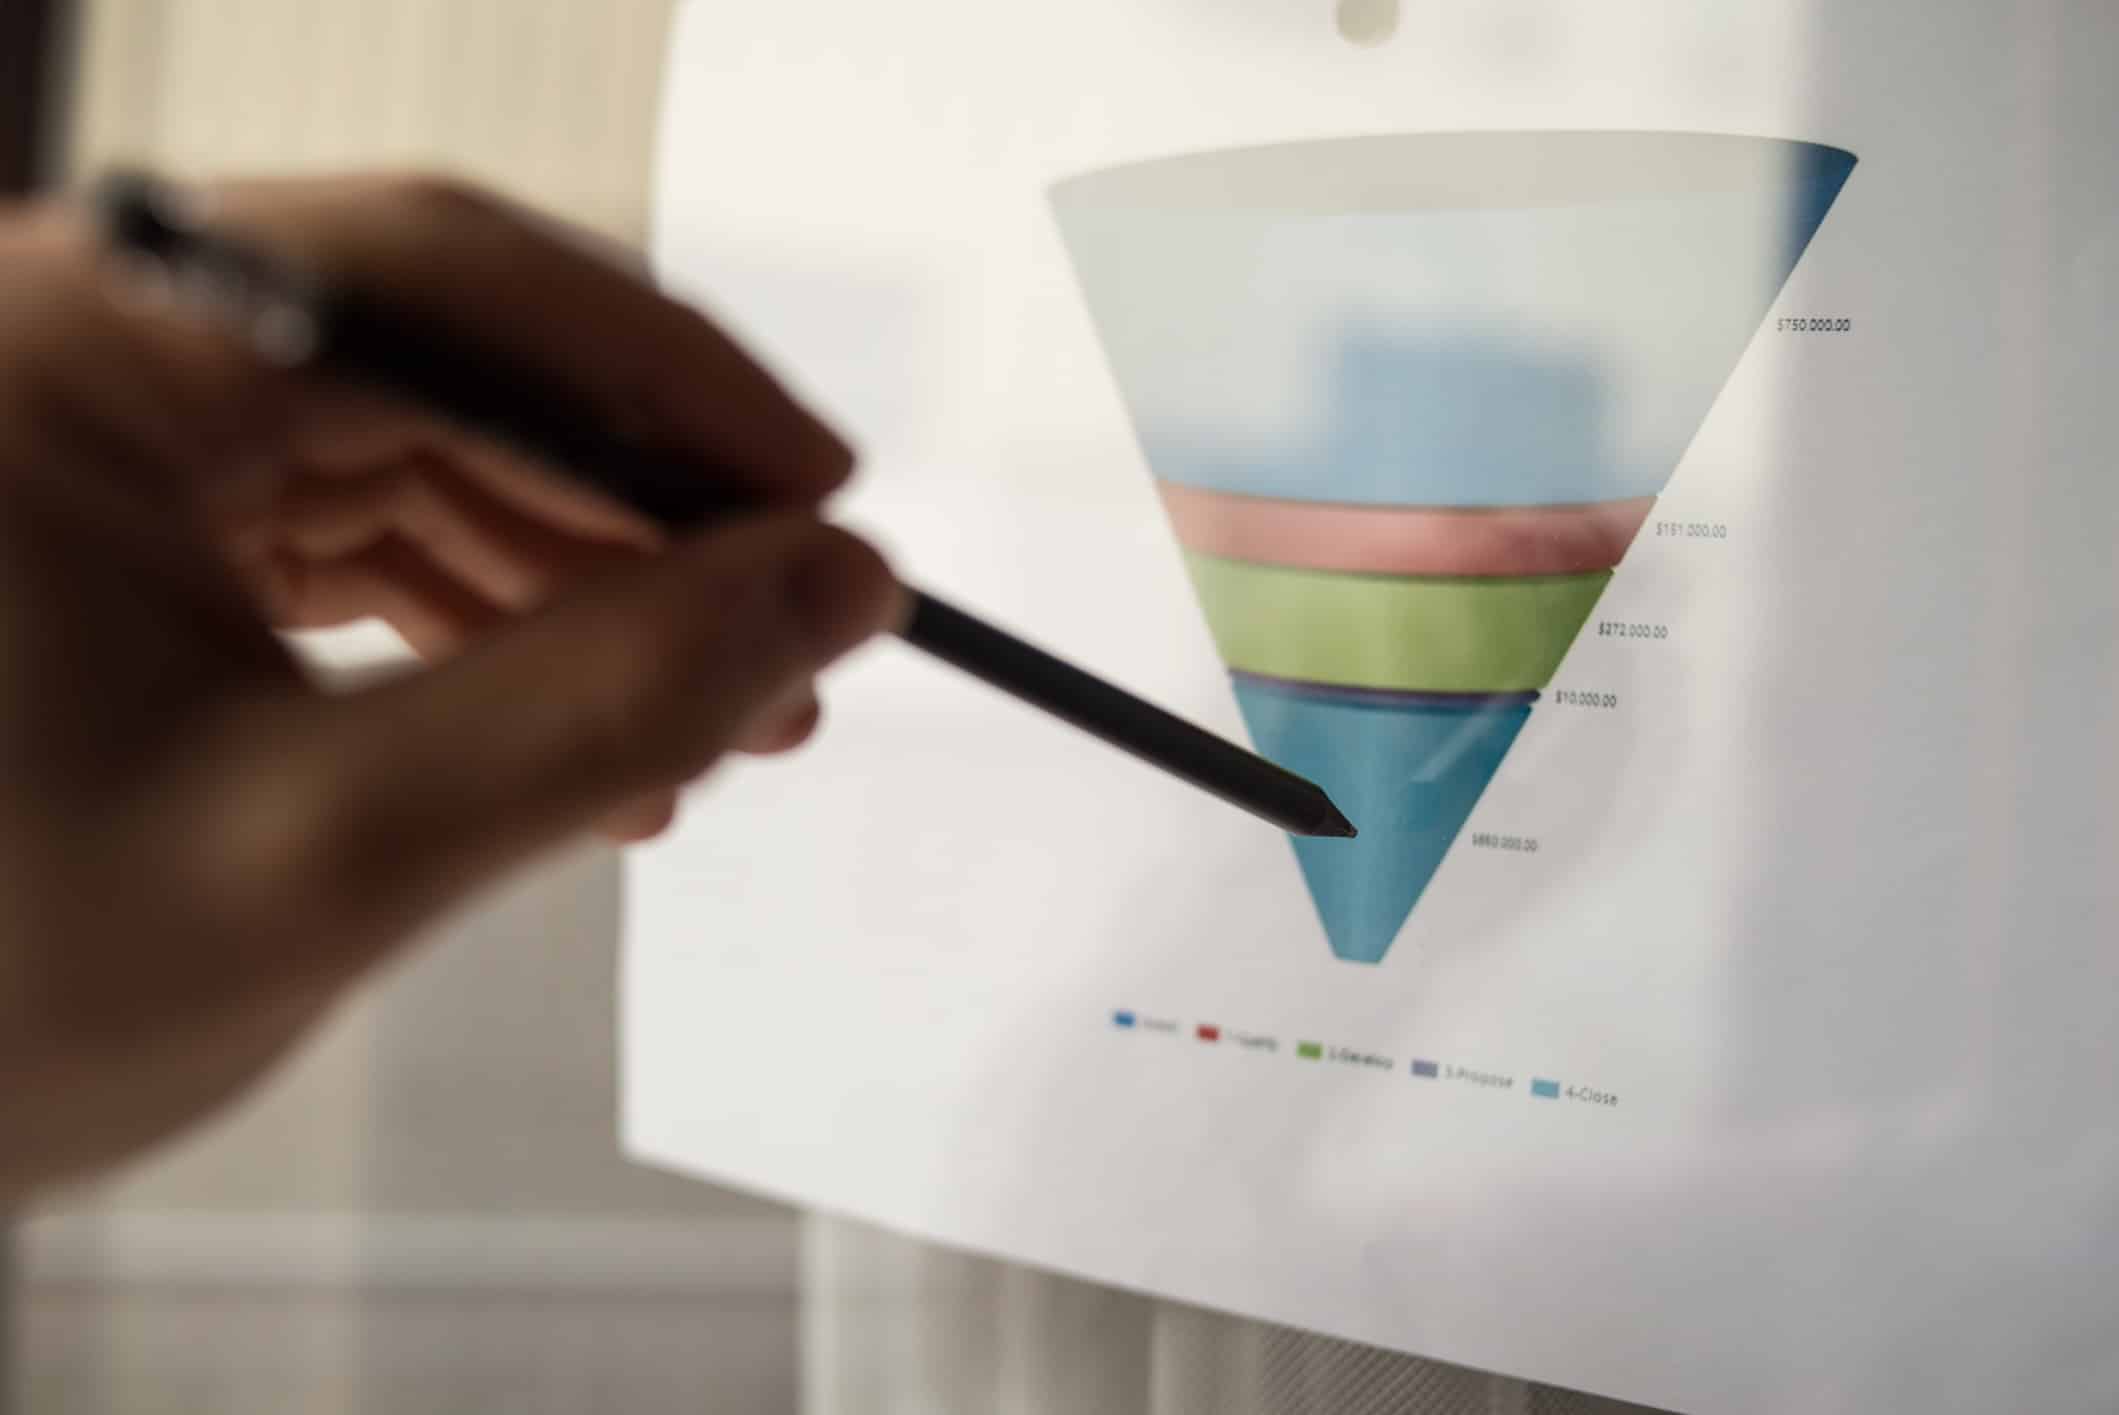 How to Build the Perfect Conversion Funnel with Content Mapped to the Buyer Journey